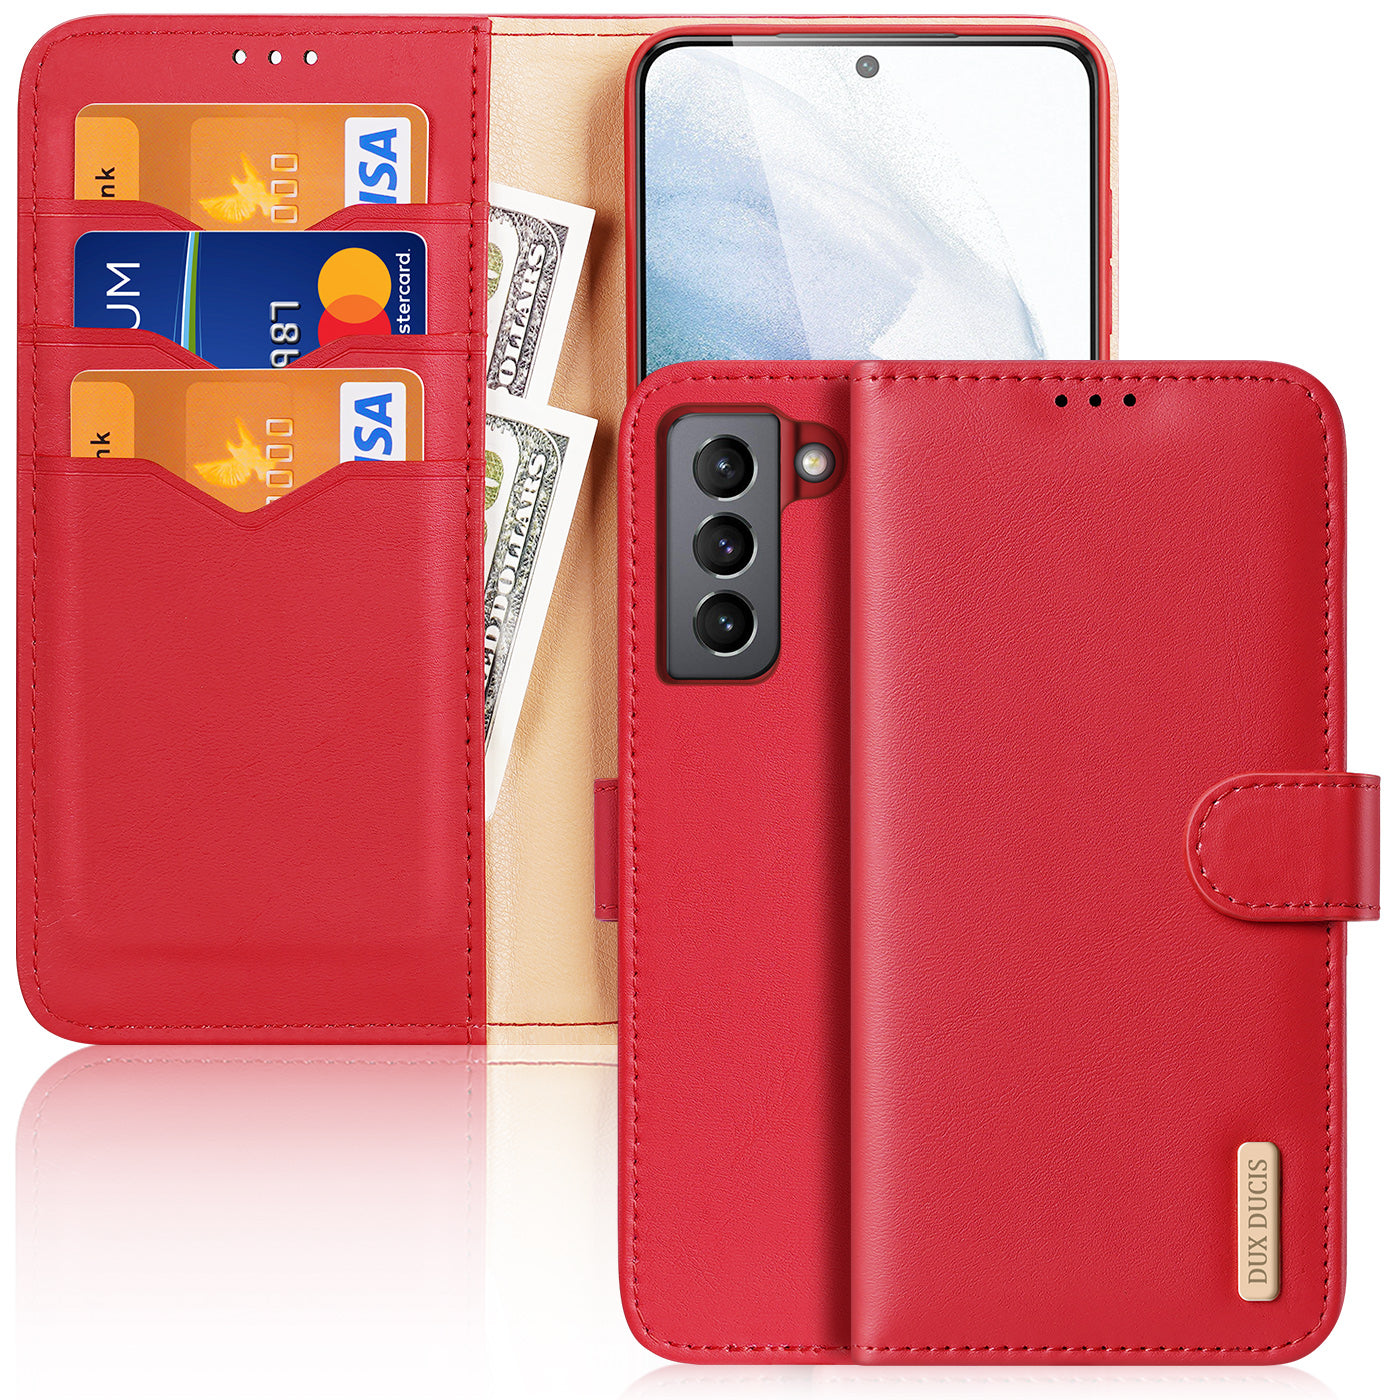 Samsung Galaxy S21 FE 5G Cases, Covers &amp; Accessories